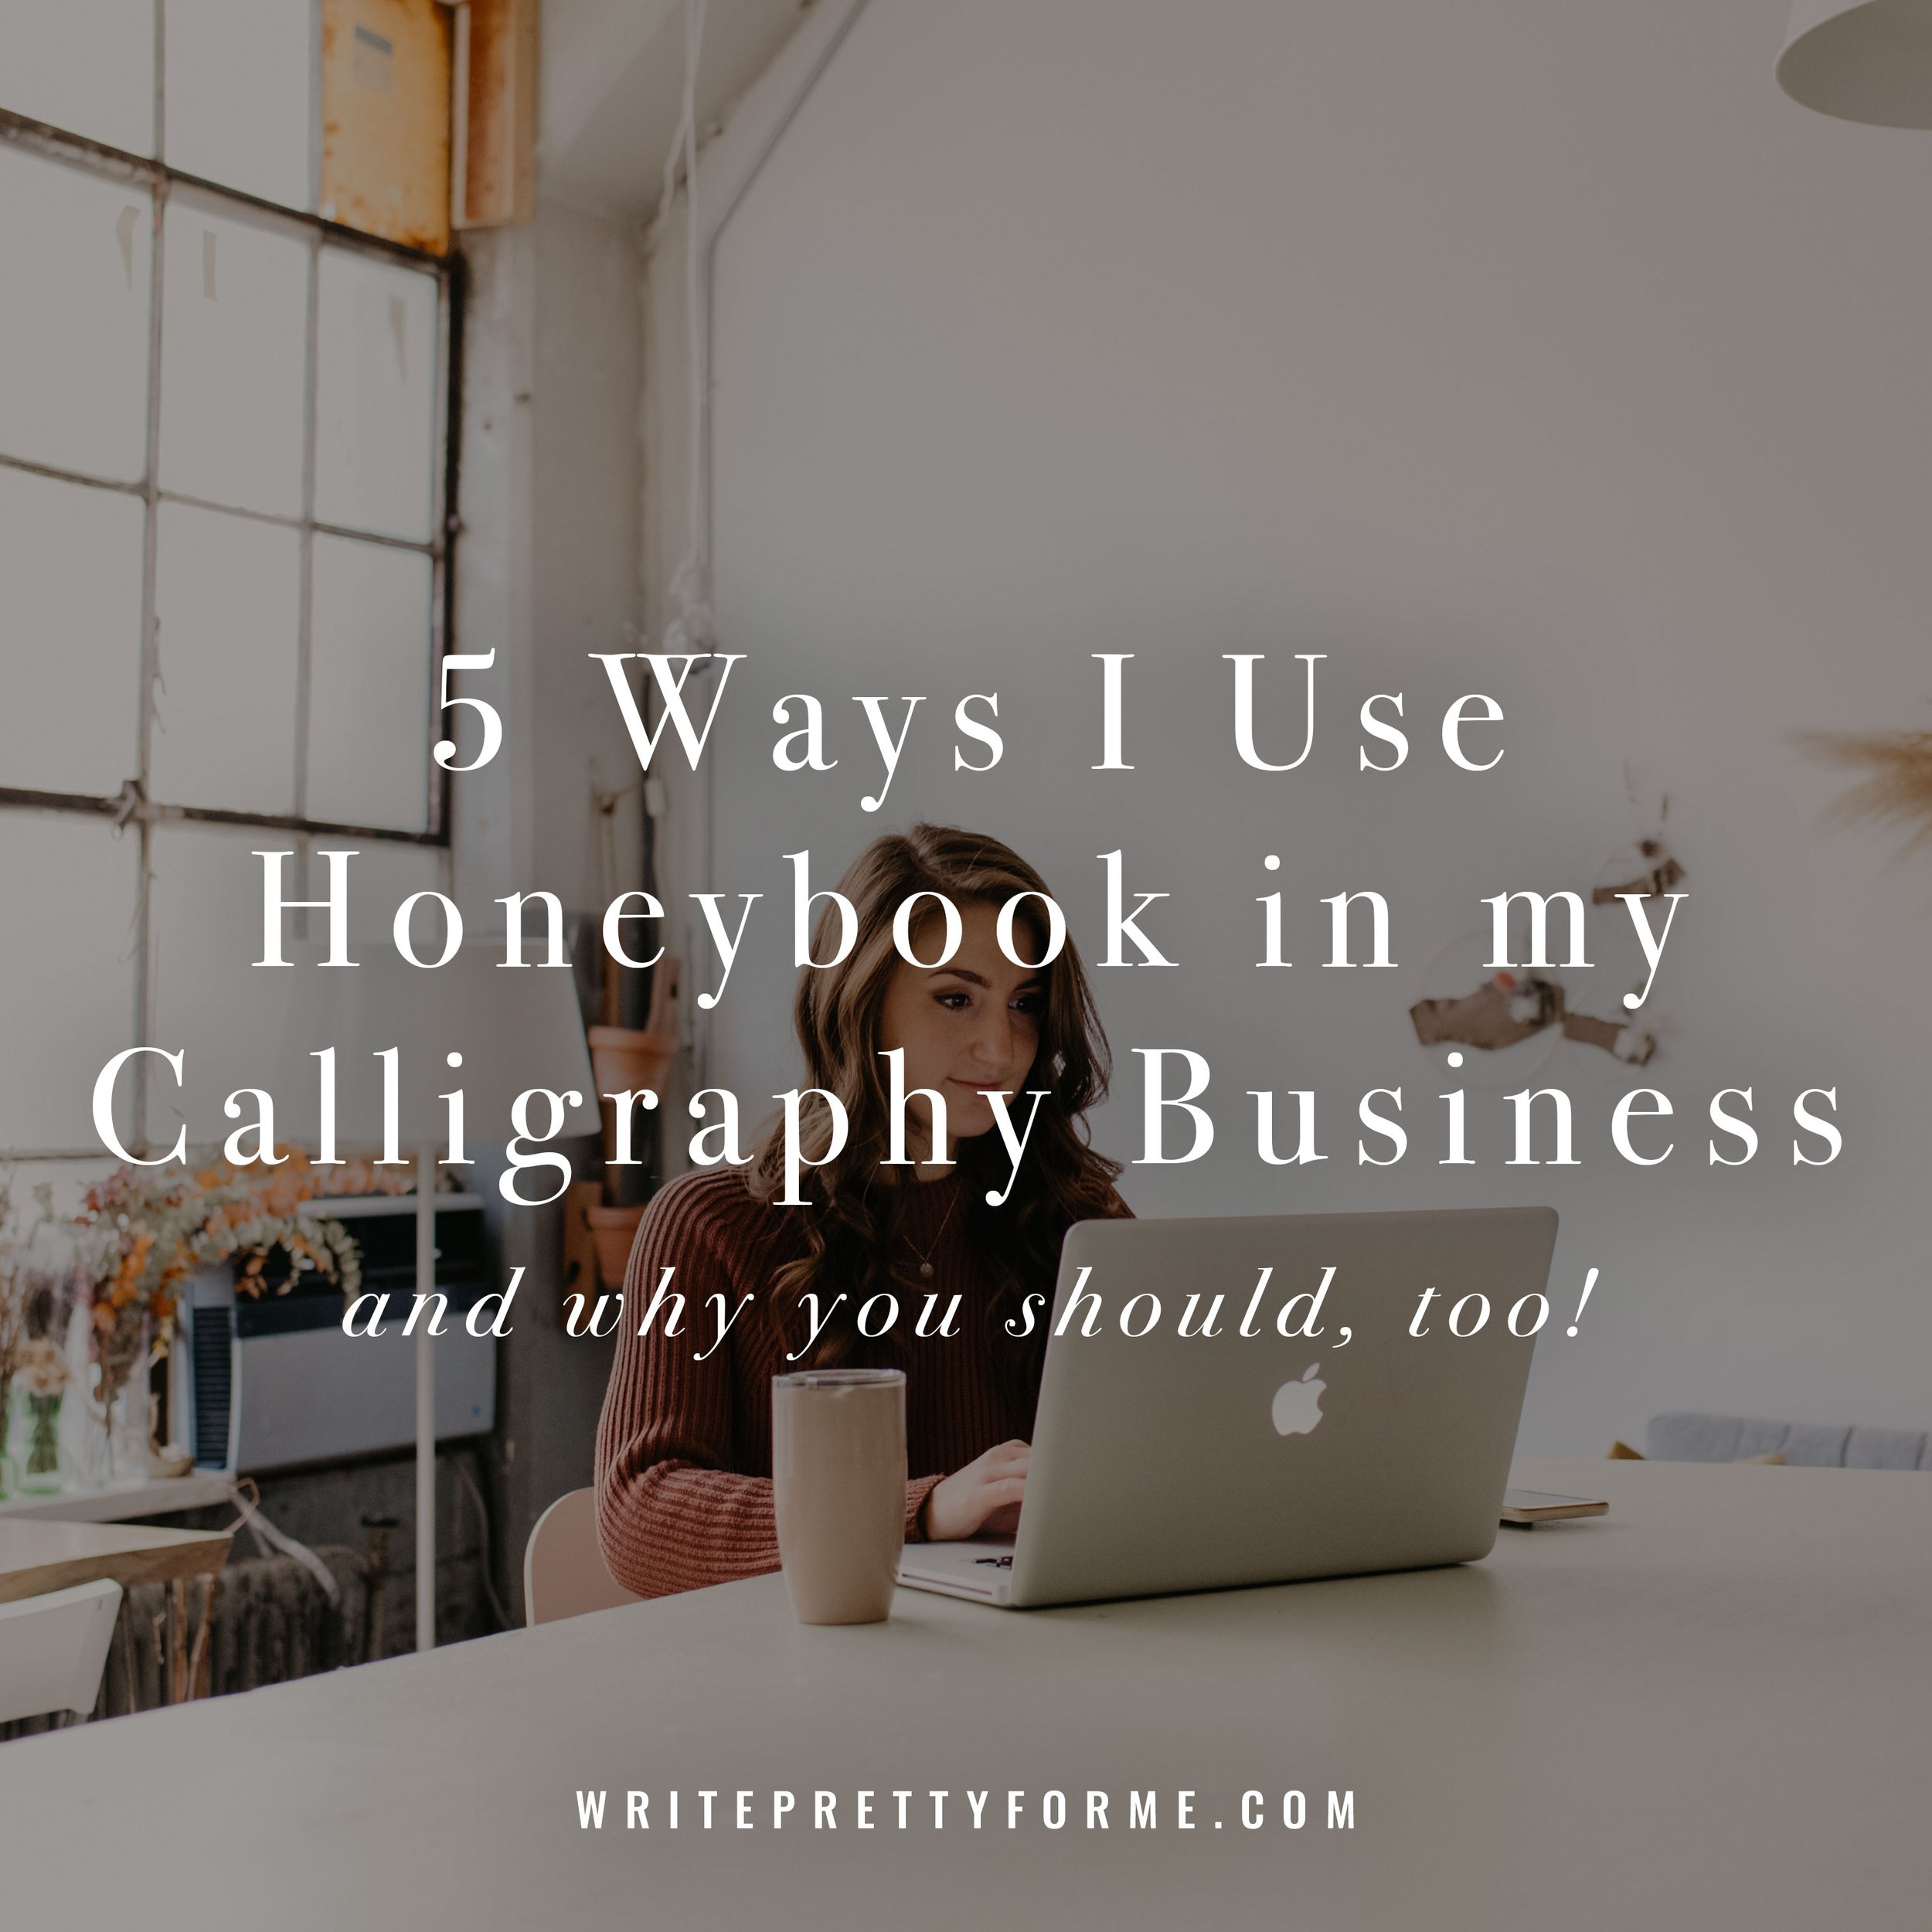 5 Ways that I Use Honeybook in My Calligraphy Business